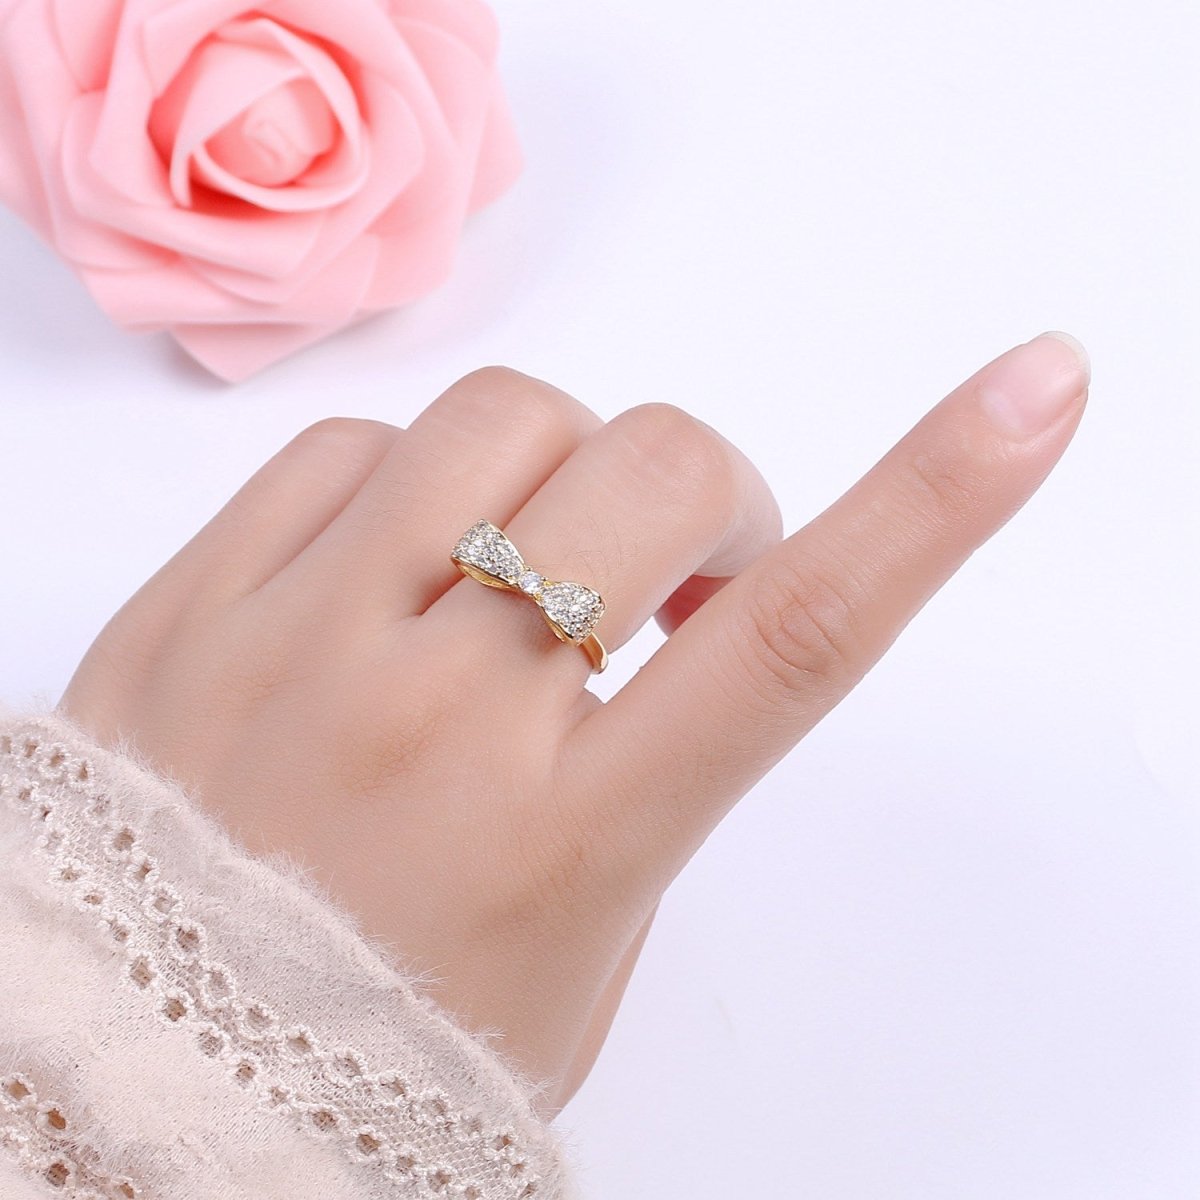 Dainty Gold Bow ring, Gold Minimalist Ring, Dainty Stackable Rings, Open Adjustable Ring CZ Ribbon Kawaii Cute Ring S-166 - DLUXCA